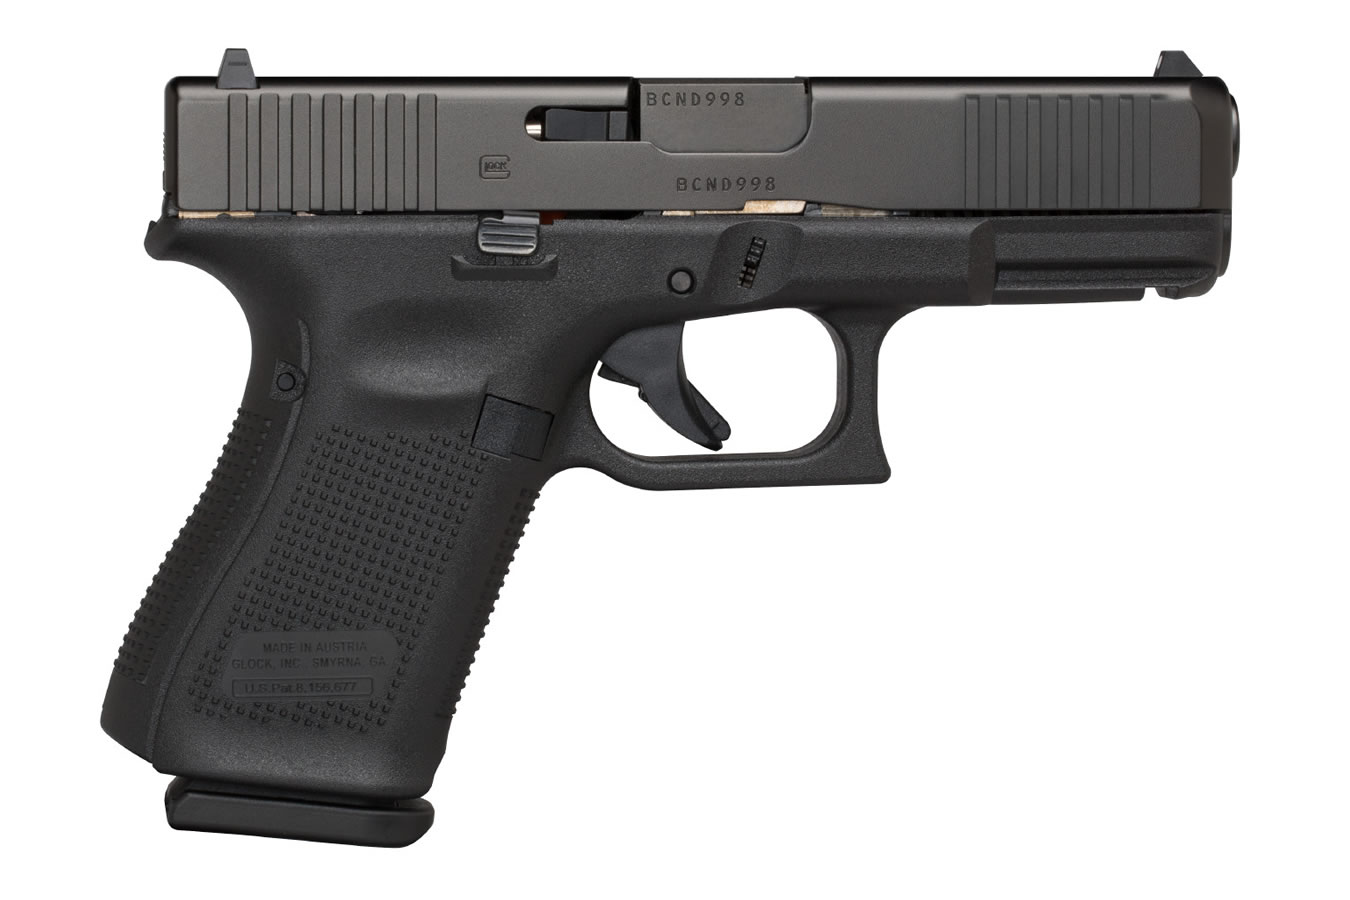 GLOCK 19 GEN5 9MM 15-ROUND PISTOL WITH FRONT SERRATIONS (MADE IN USA)